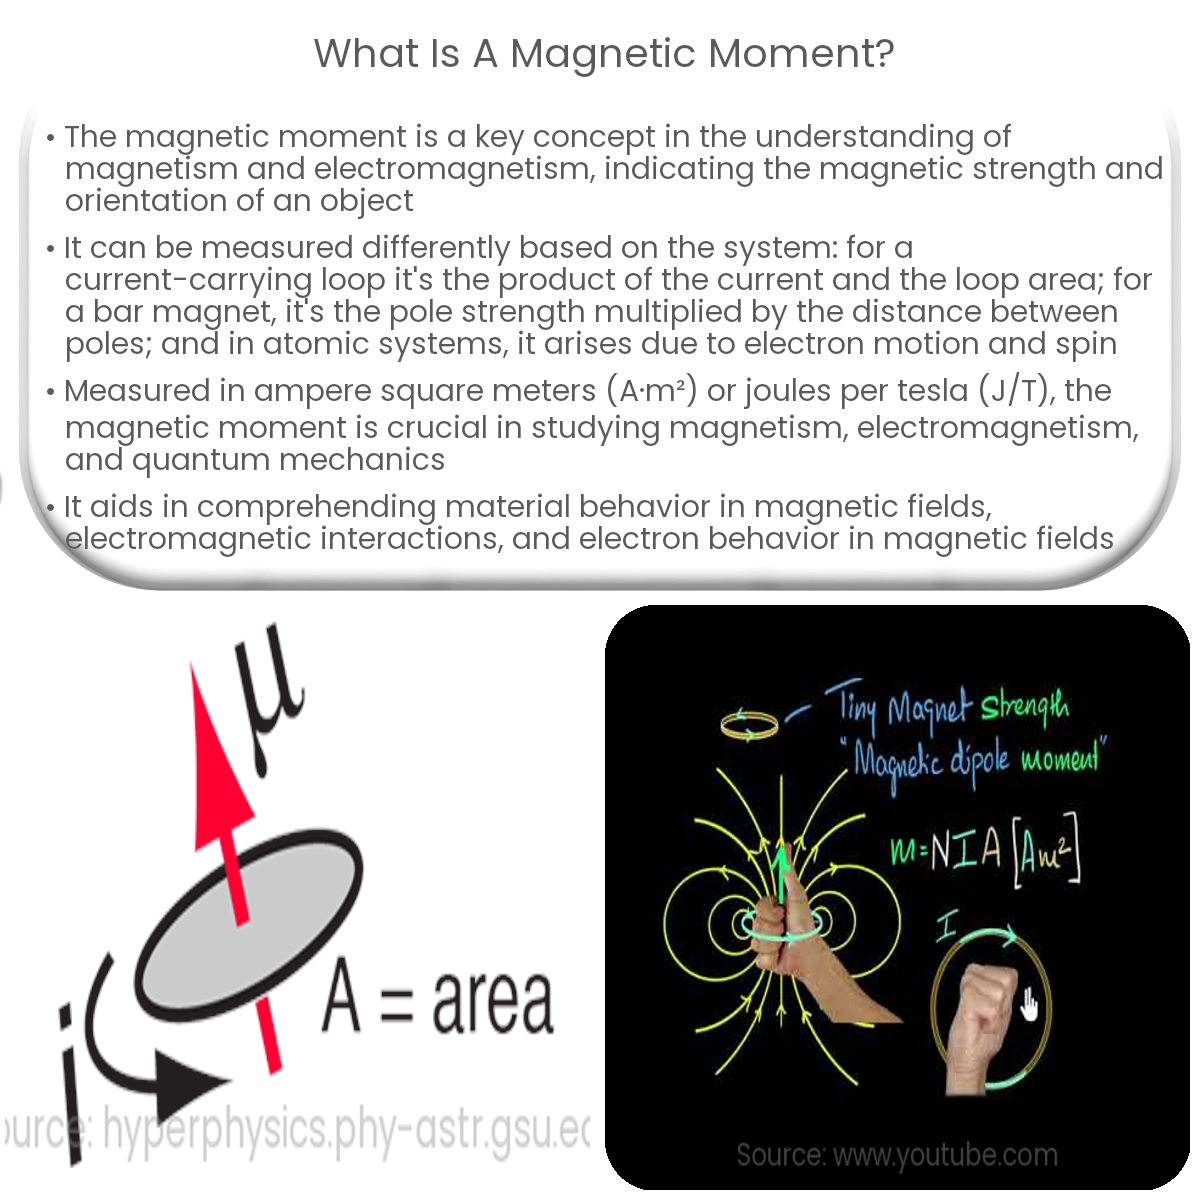 What is a magnetic moment?